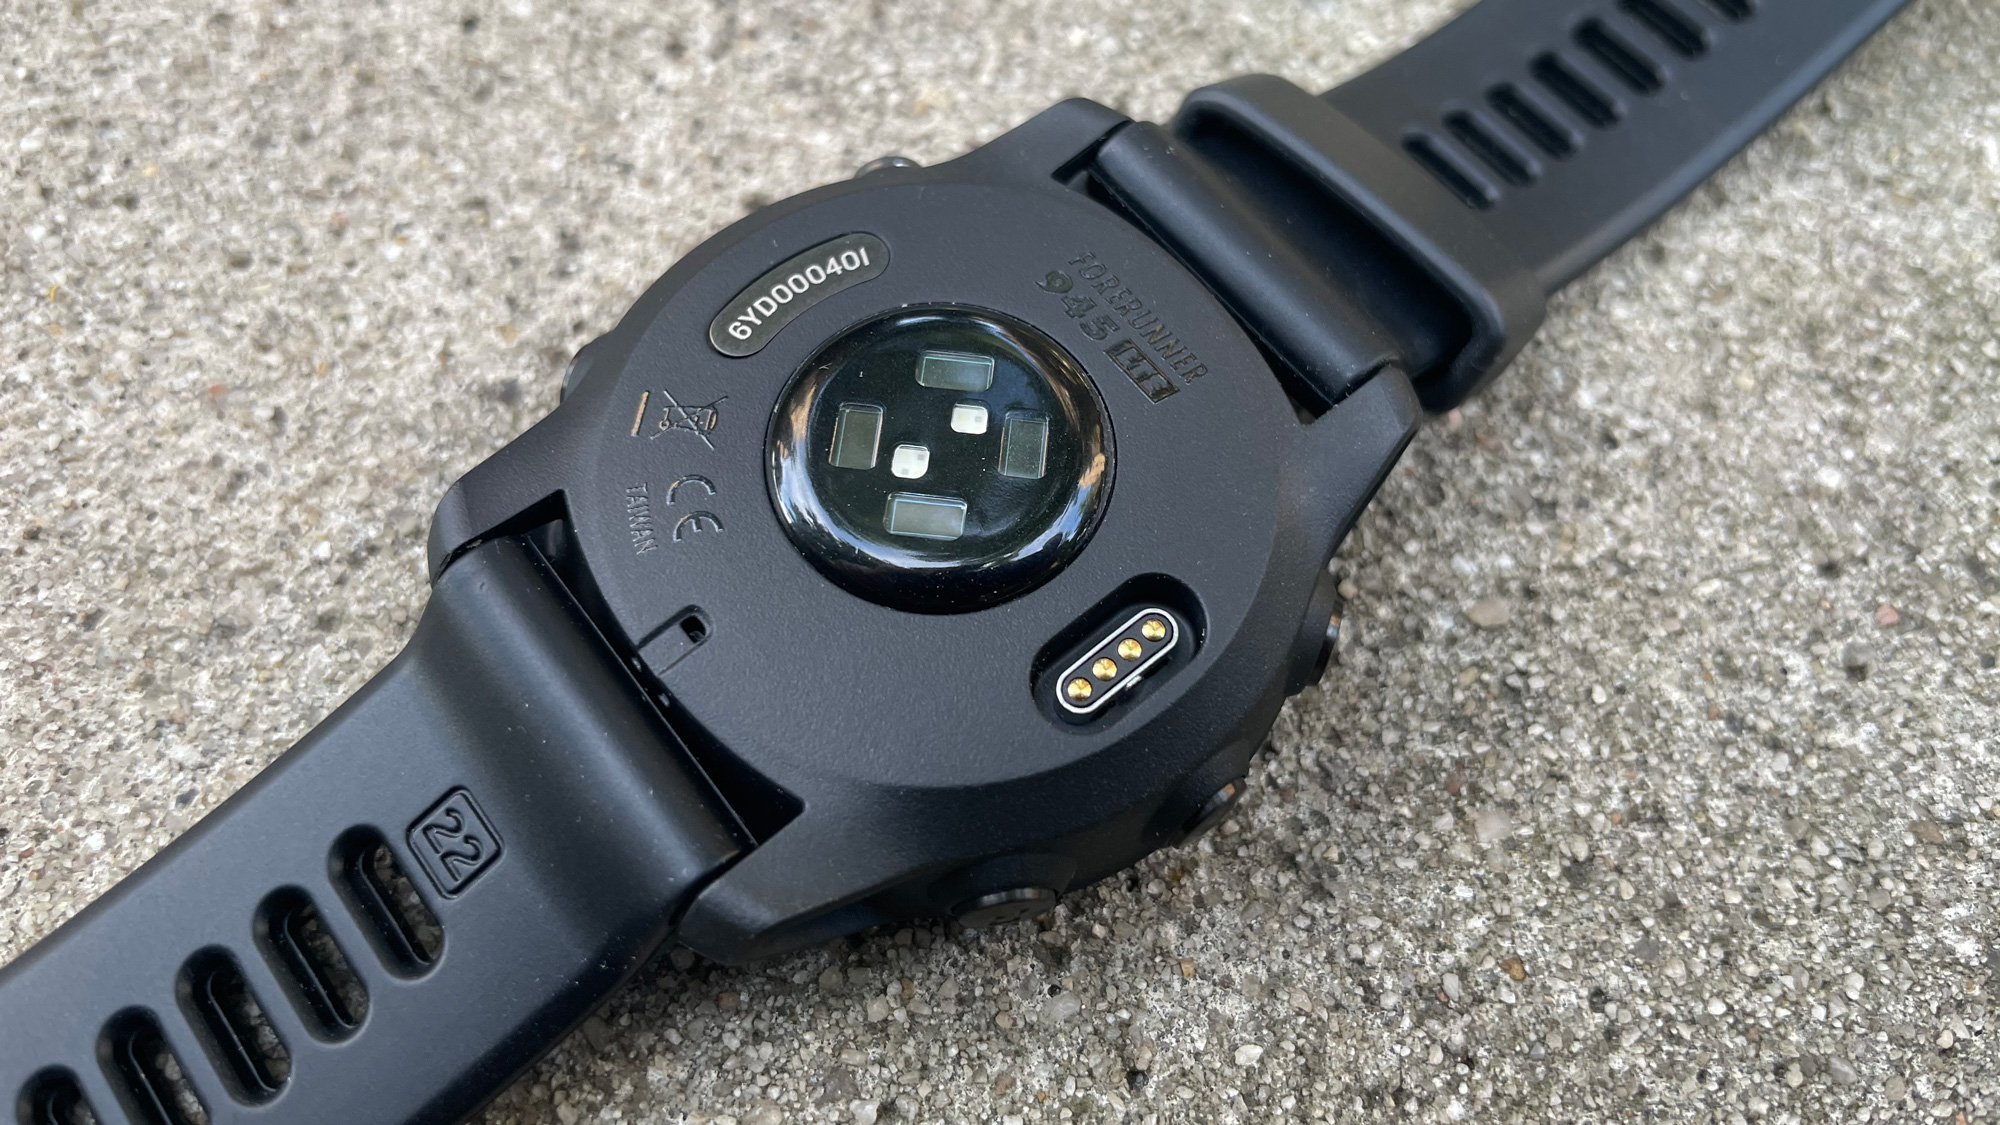 Garmin Forerunner 945 review: the watch of choice if you love to track